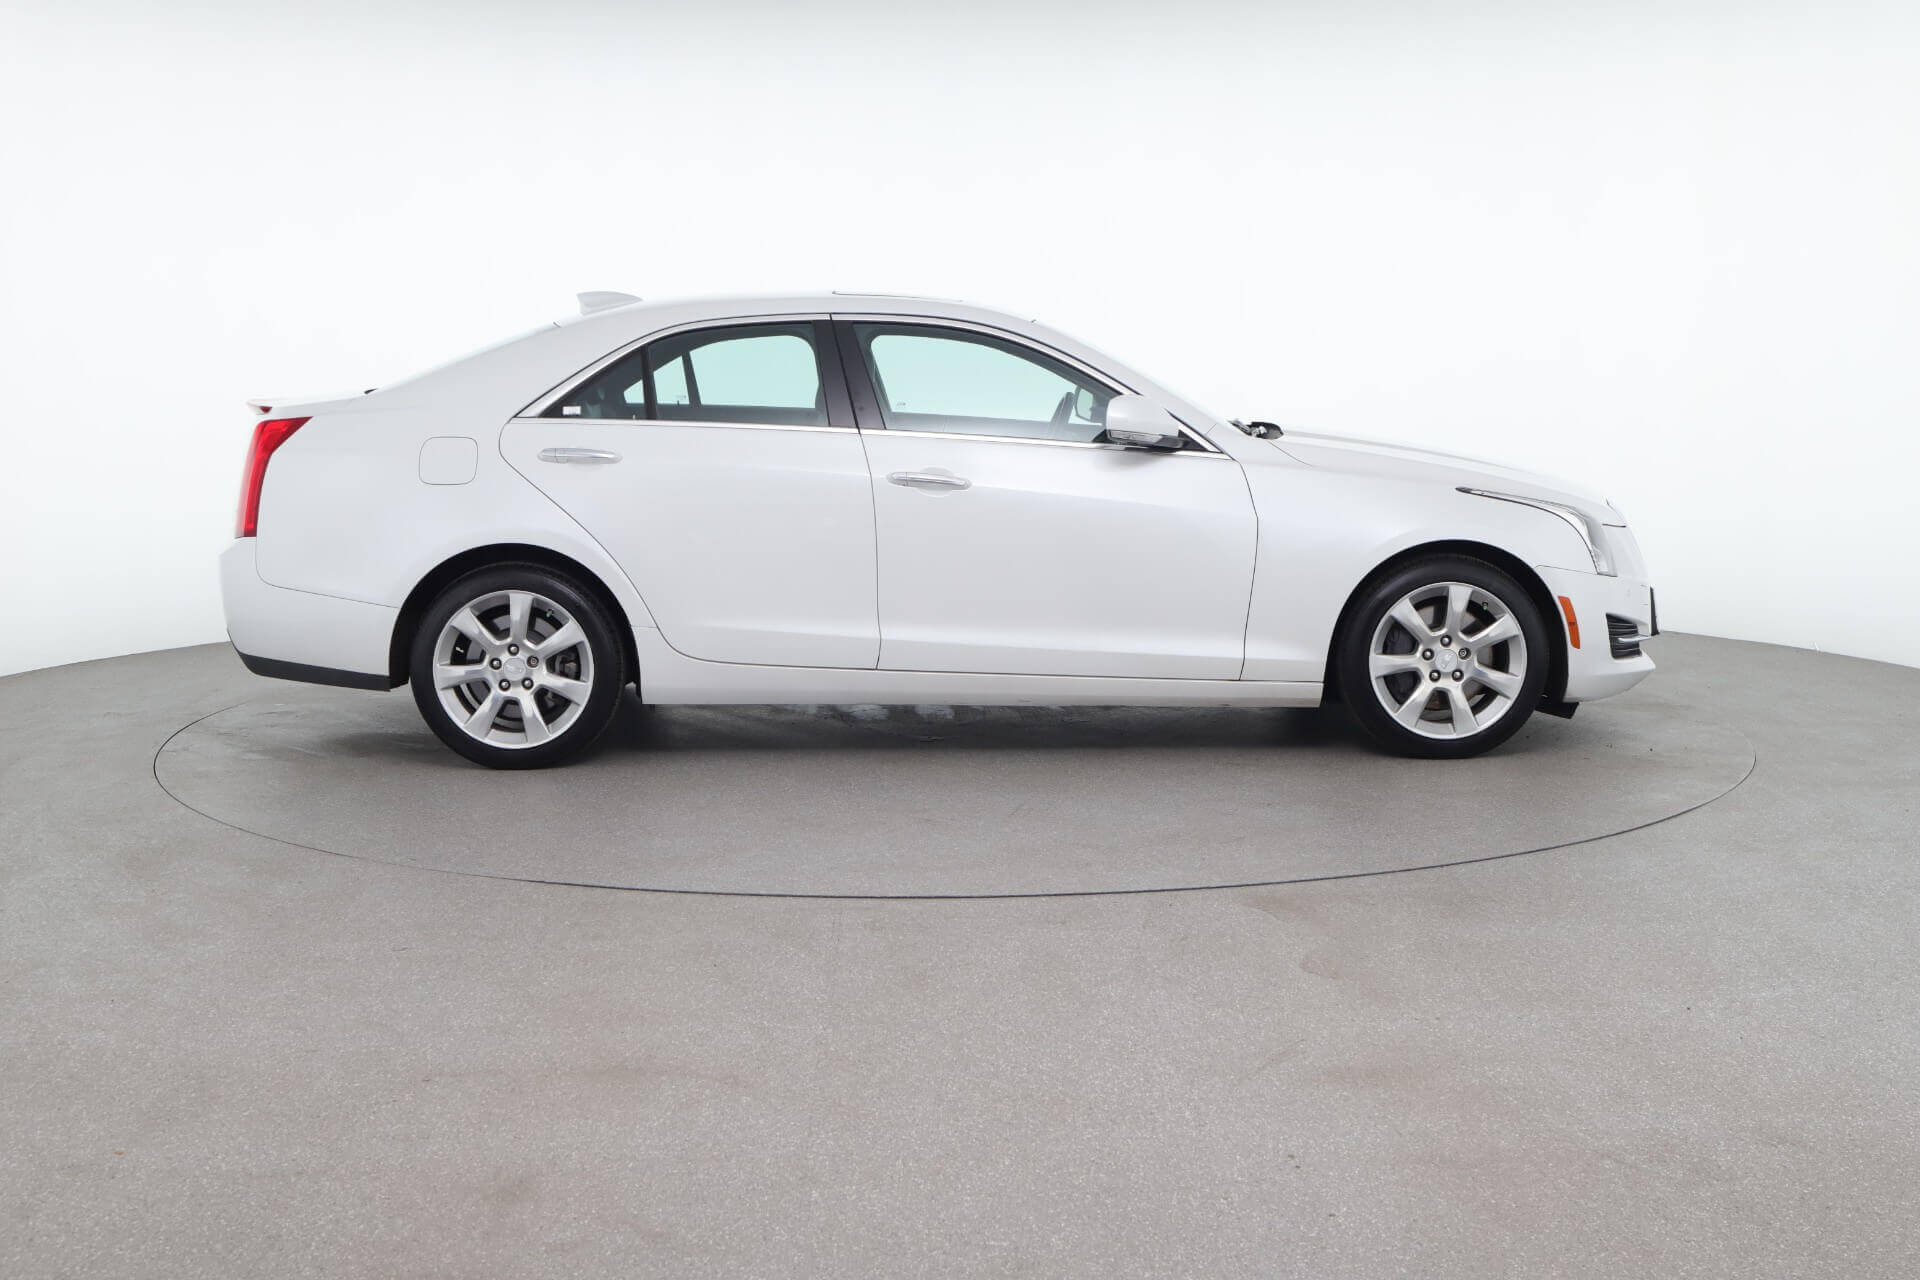 How Much Is A Cadillac? A Complete Guide On Prices And Features | Shift